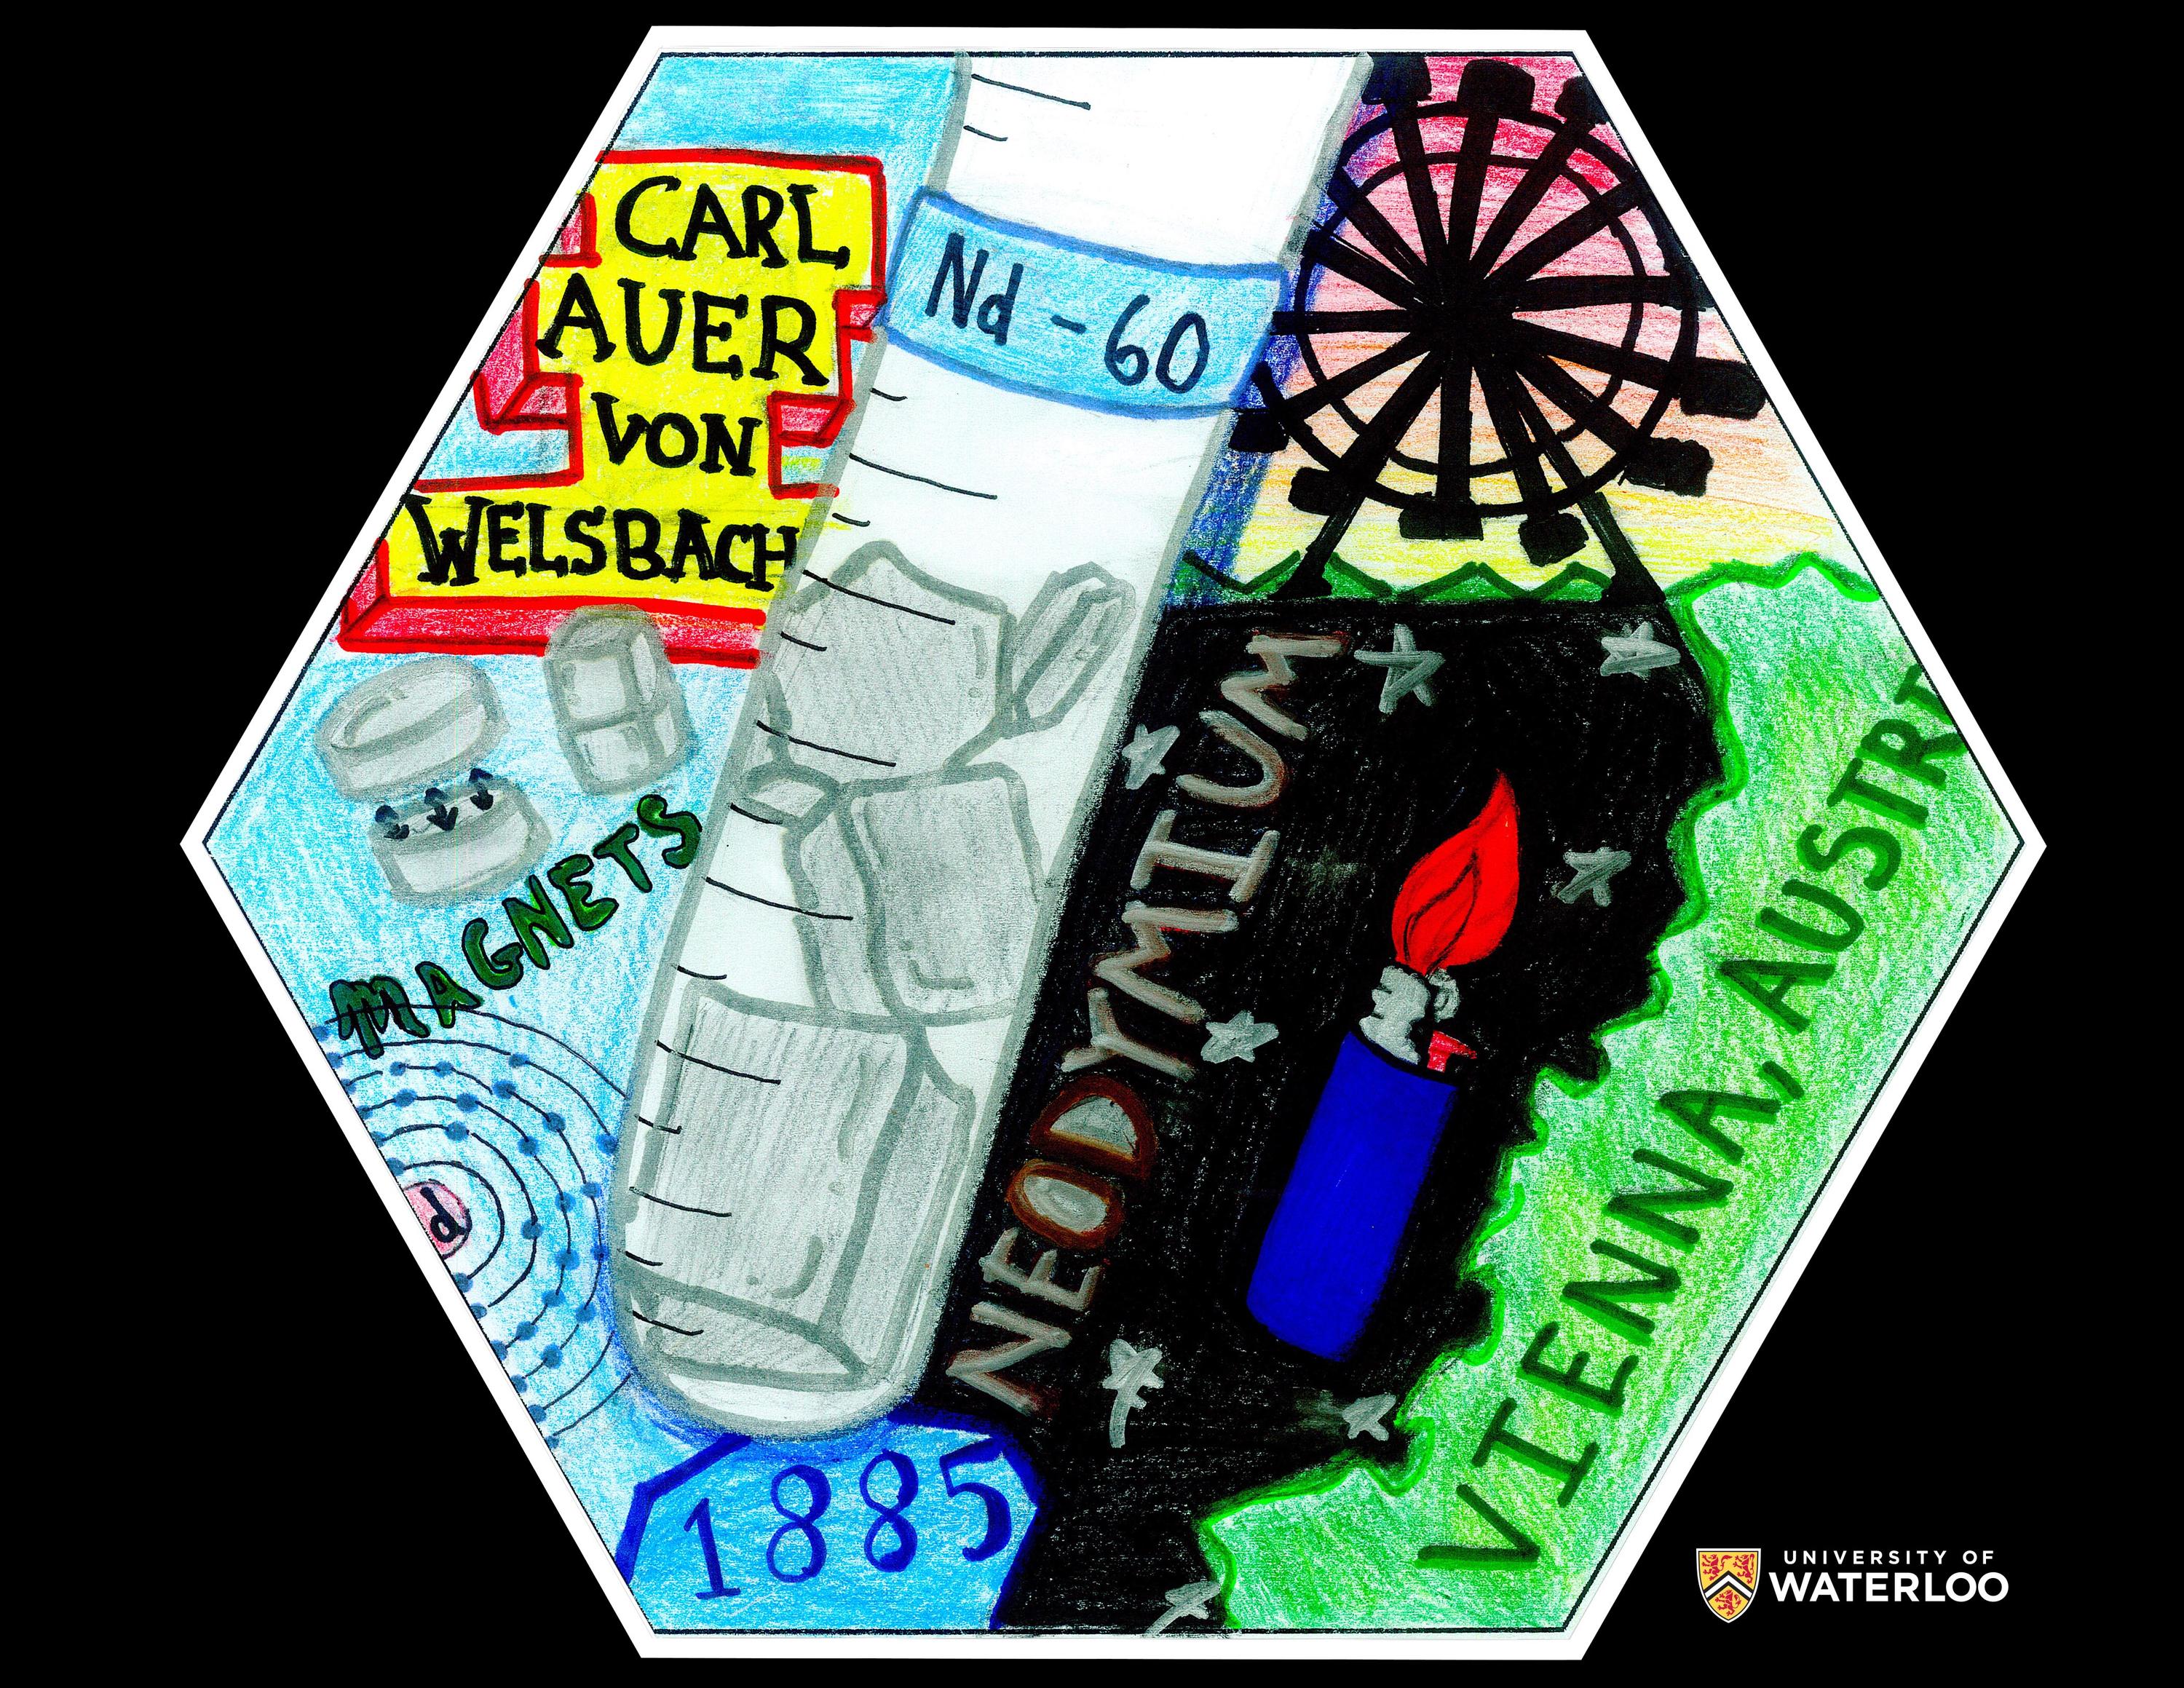 Coloured pencil and ink on paper. A large glass vial containing metal and labeled “Nd-60” appears centre with “Neodymium” and “1885”. To the left are “Carl Auer von Welsbach” and “magnets” along with a Bohr model of neodymium. To the right are a lighter, ferris wheel, and Vienna, Austria.